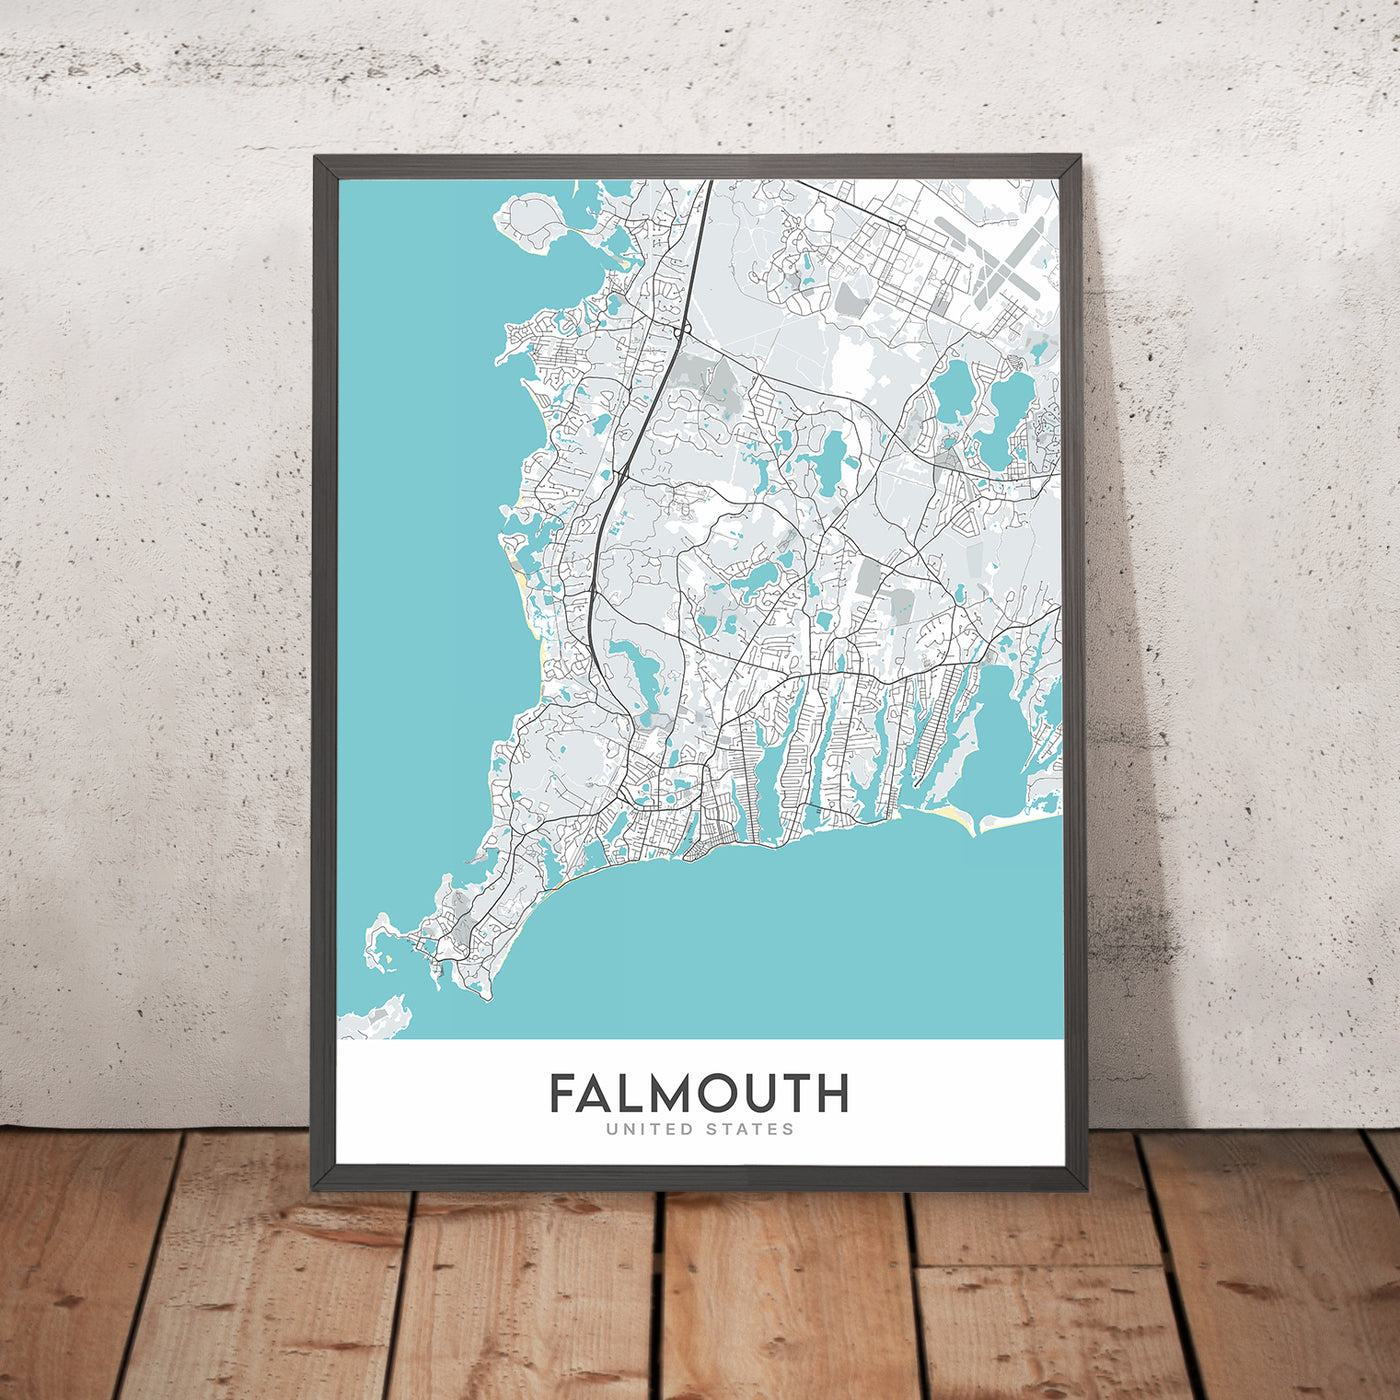 Moderner Stadtplan von Falmouth, MA: Falmouth Harbour, Nobska Point Lighthouse, Woods Hole Oceanographic Institution, Marine Biological Laboratory, Falmouth Heights